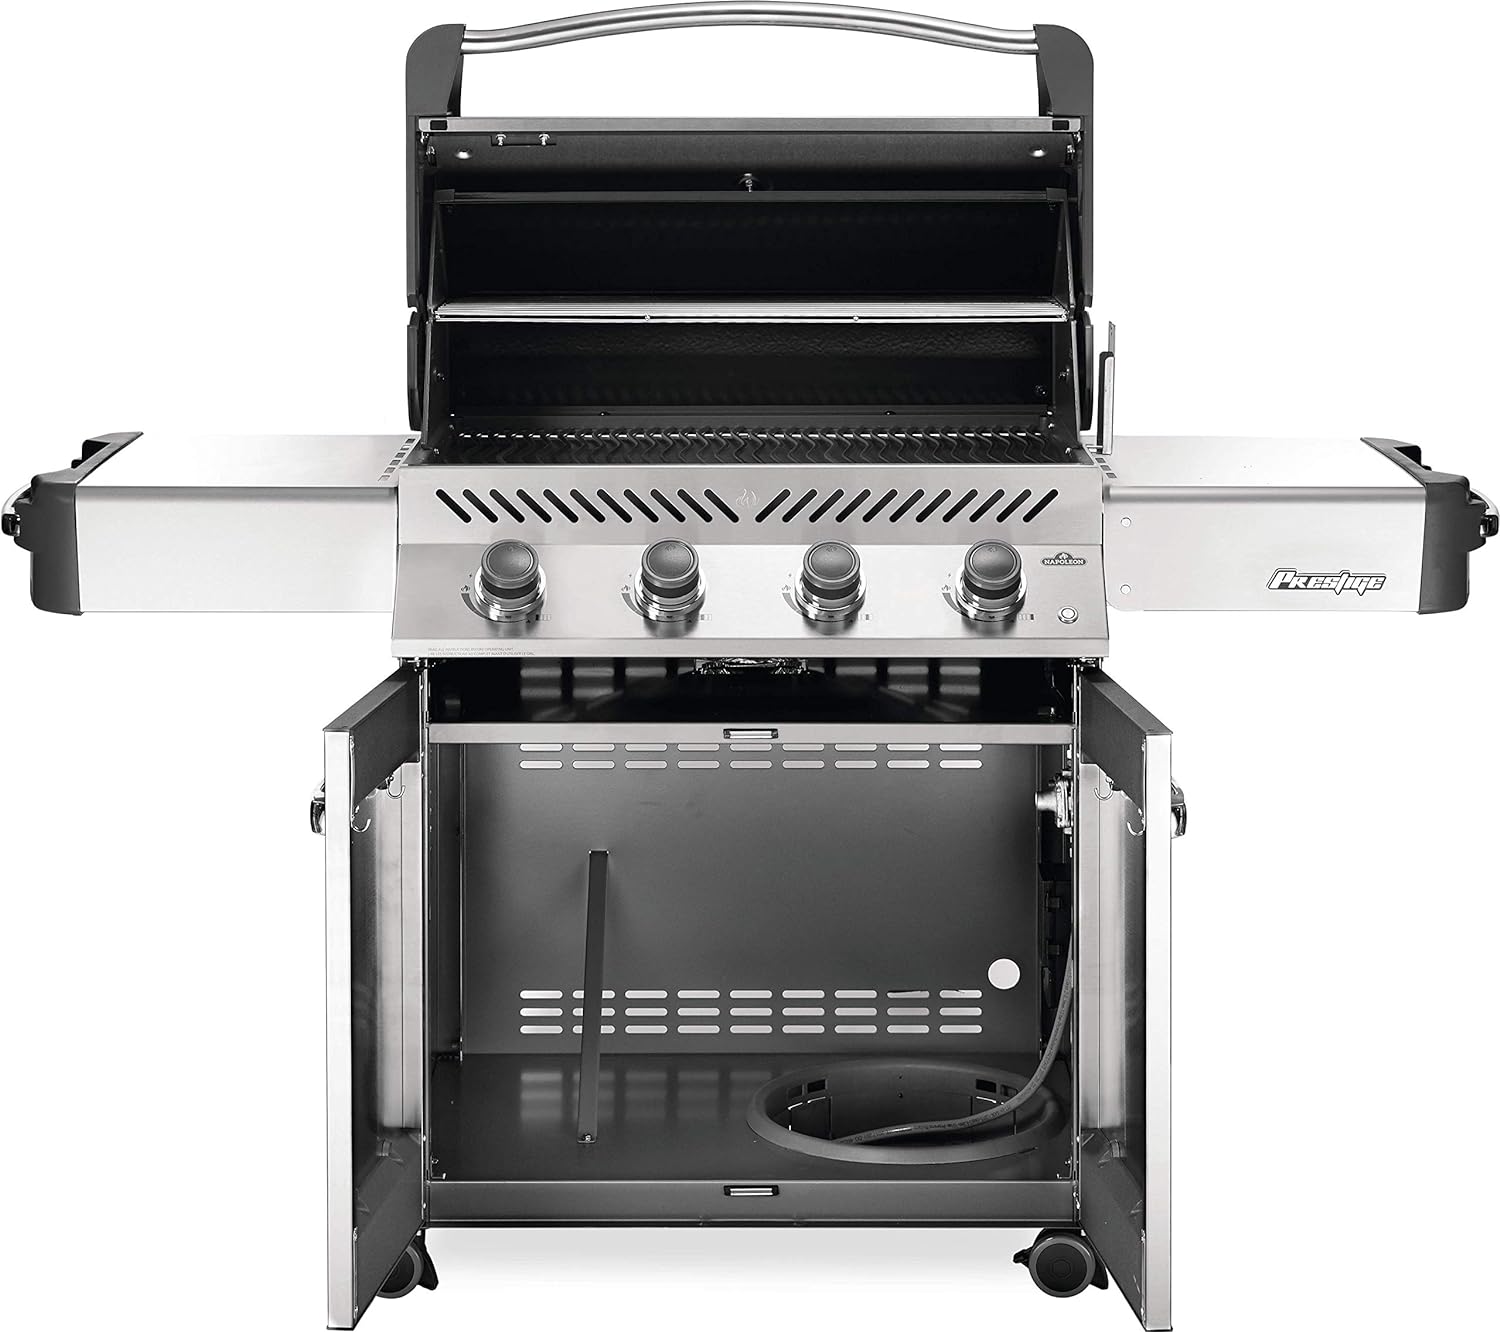 Napoleon P500RSIBPSS-3 Prestige 500 RSIB Propane Gas Grill, sq. in + Infrared Side and Rear Burner, Stainless Steel